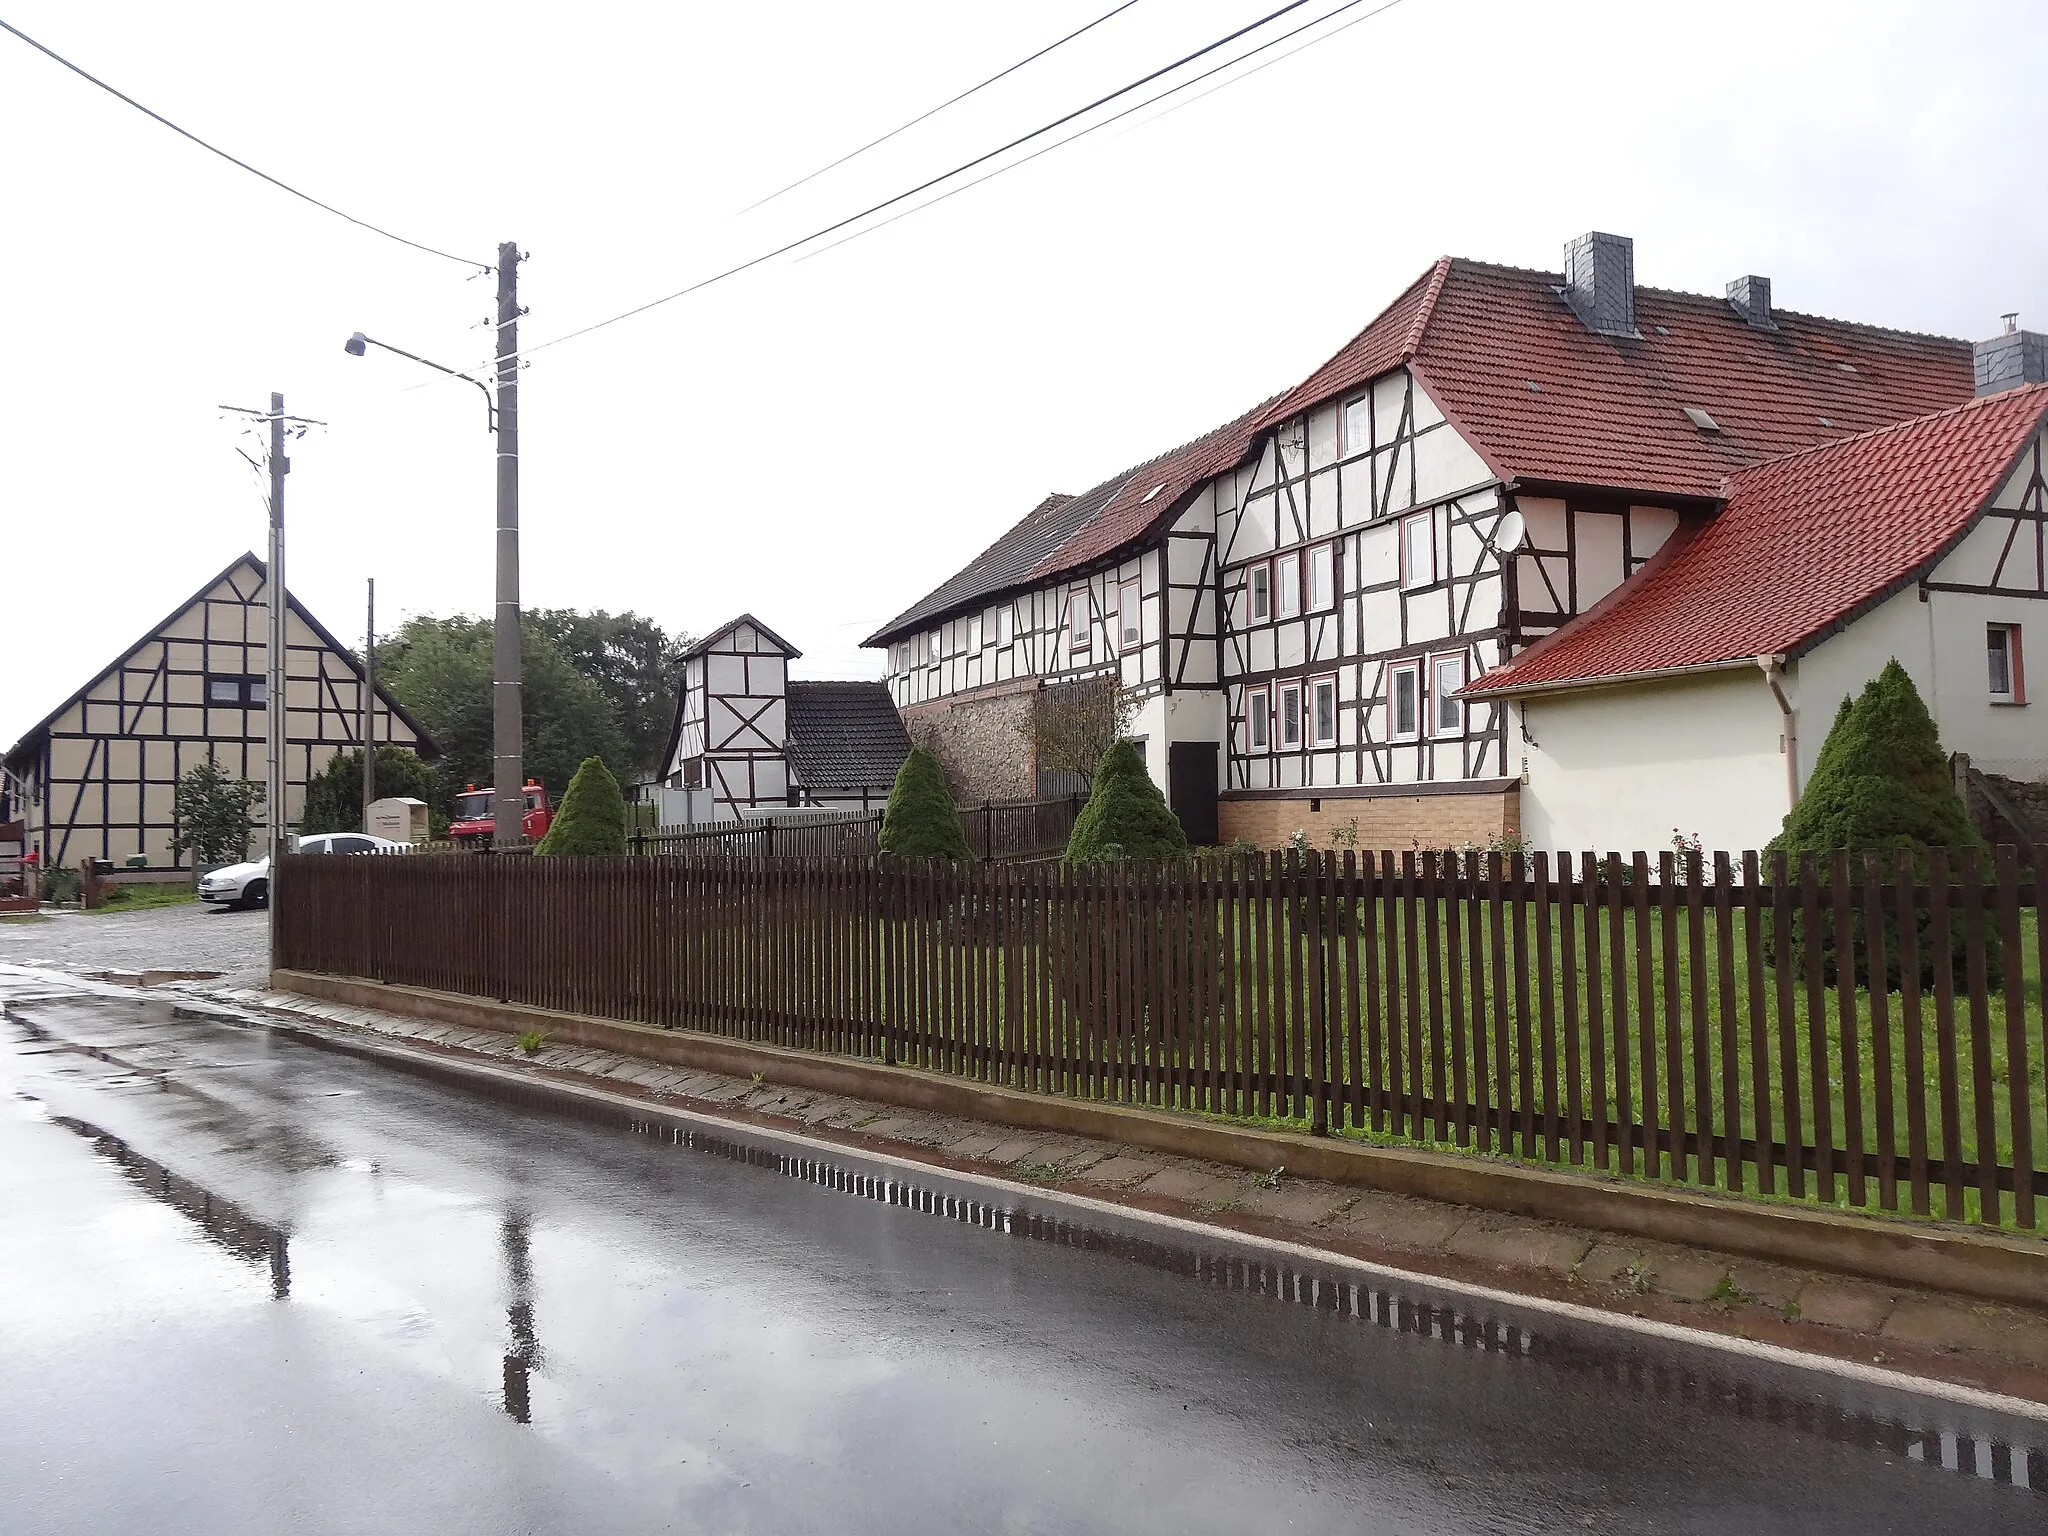 Photo showing: Main street in Immenrode (Werther), Thuringia, Germany